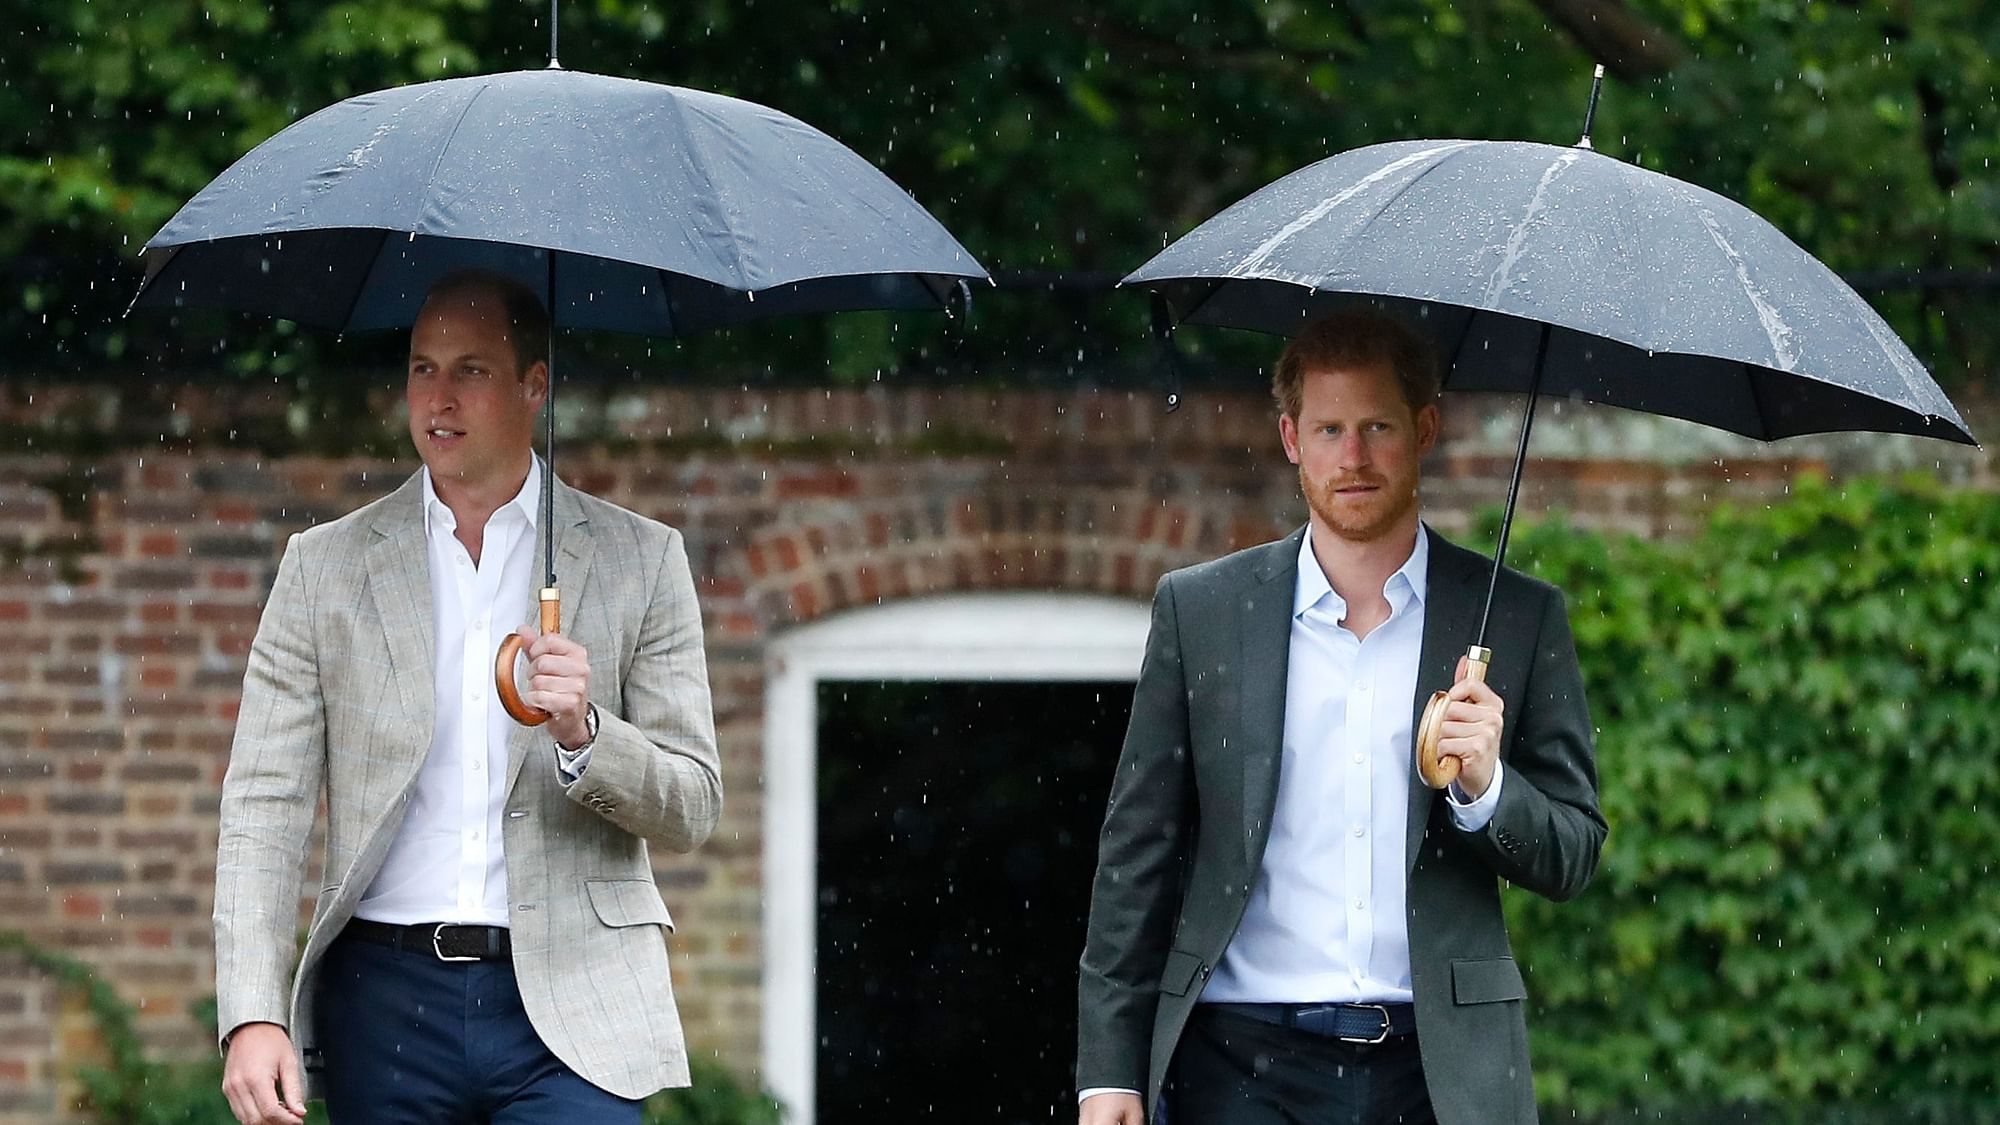 File photo of Prince William and Prince Harry.